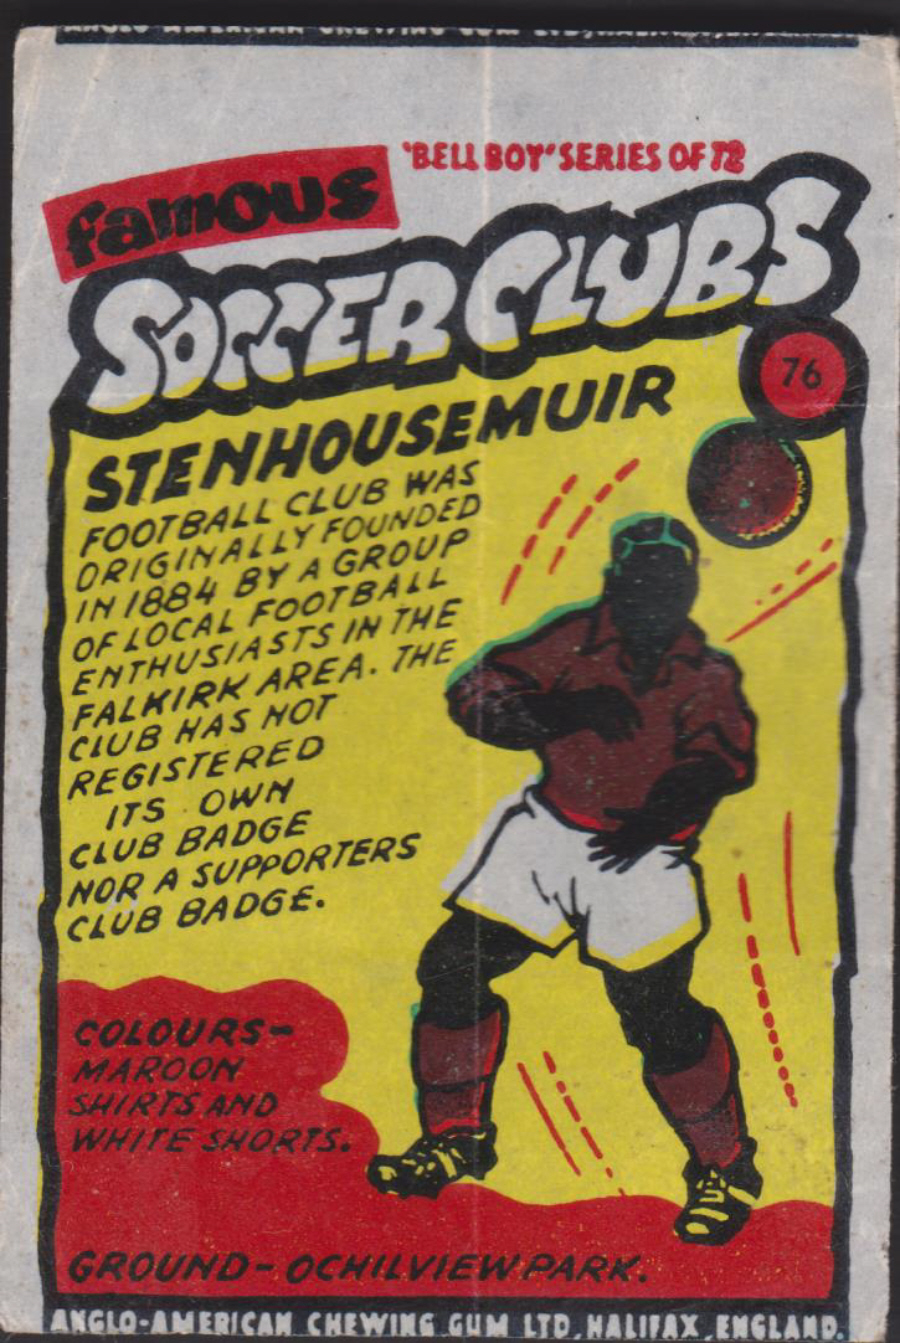 Anglo-American-Chewing-Gum-Wax-Wrapper-Famous-Soccer-Clubs-No-76 -Stenhousemuir - Click Image to Close